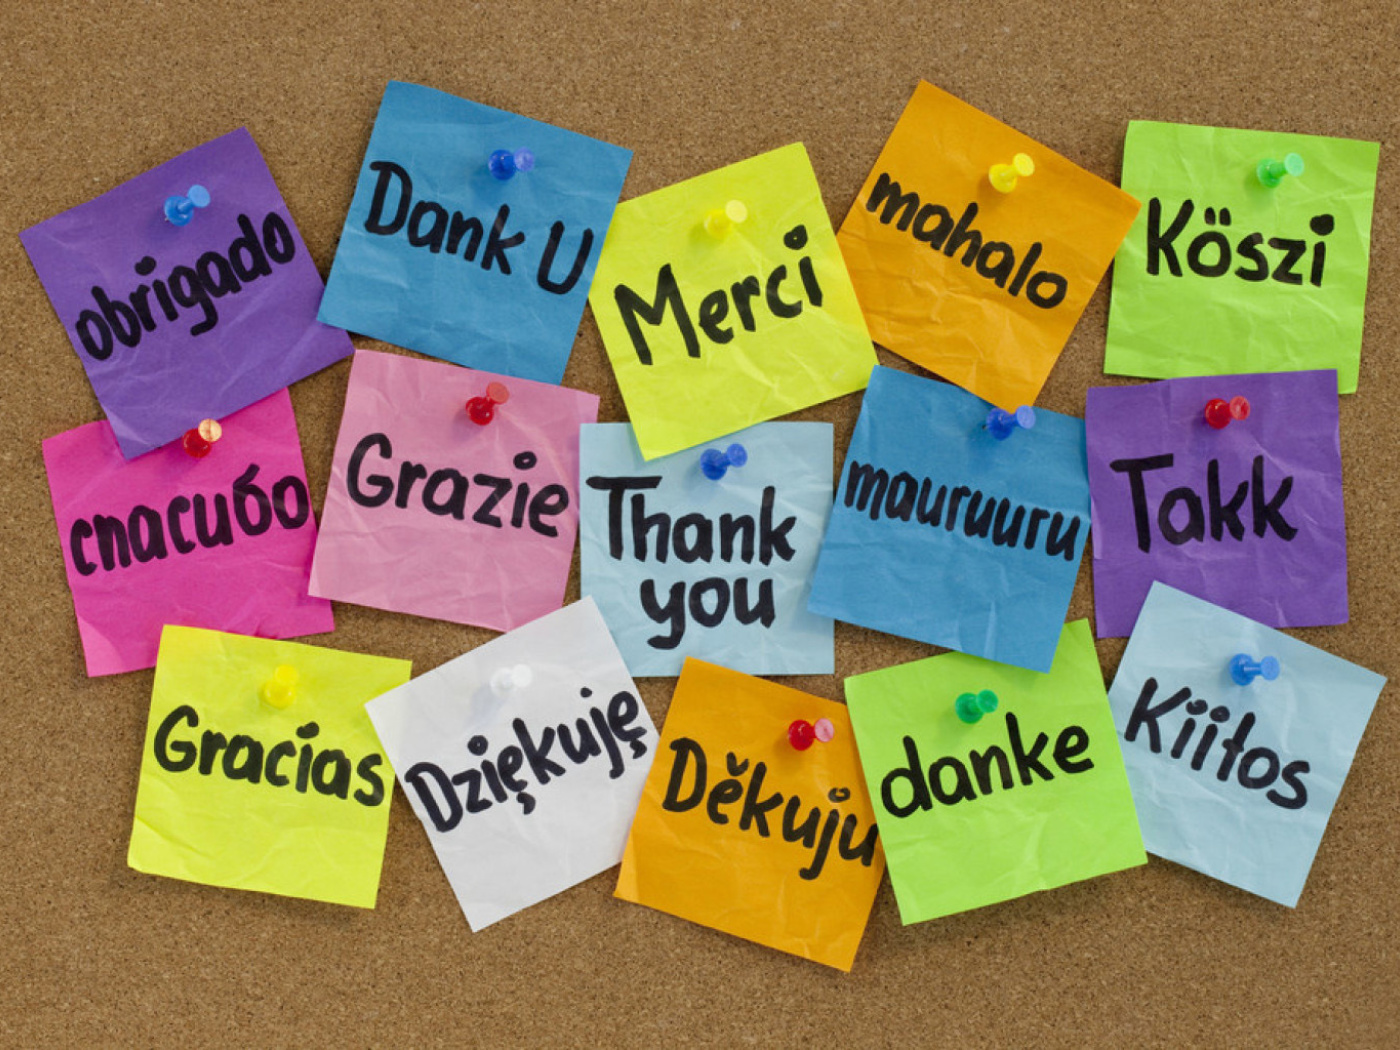 How To Say Thank You in Different Languages wallpaper 1400x1050